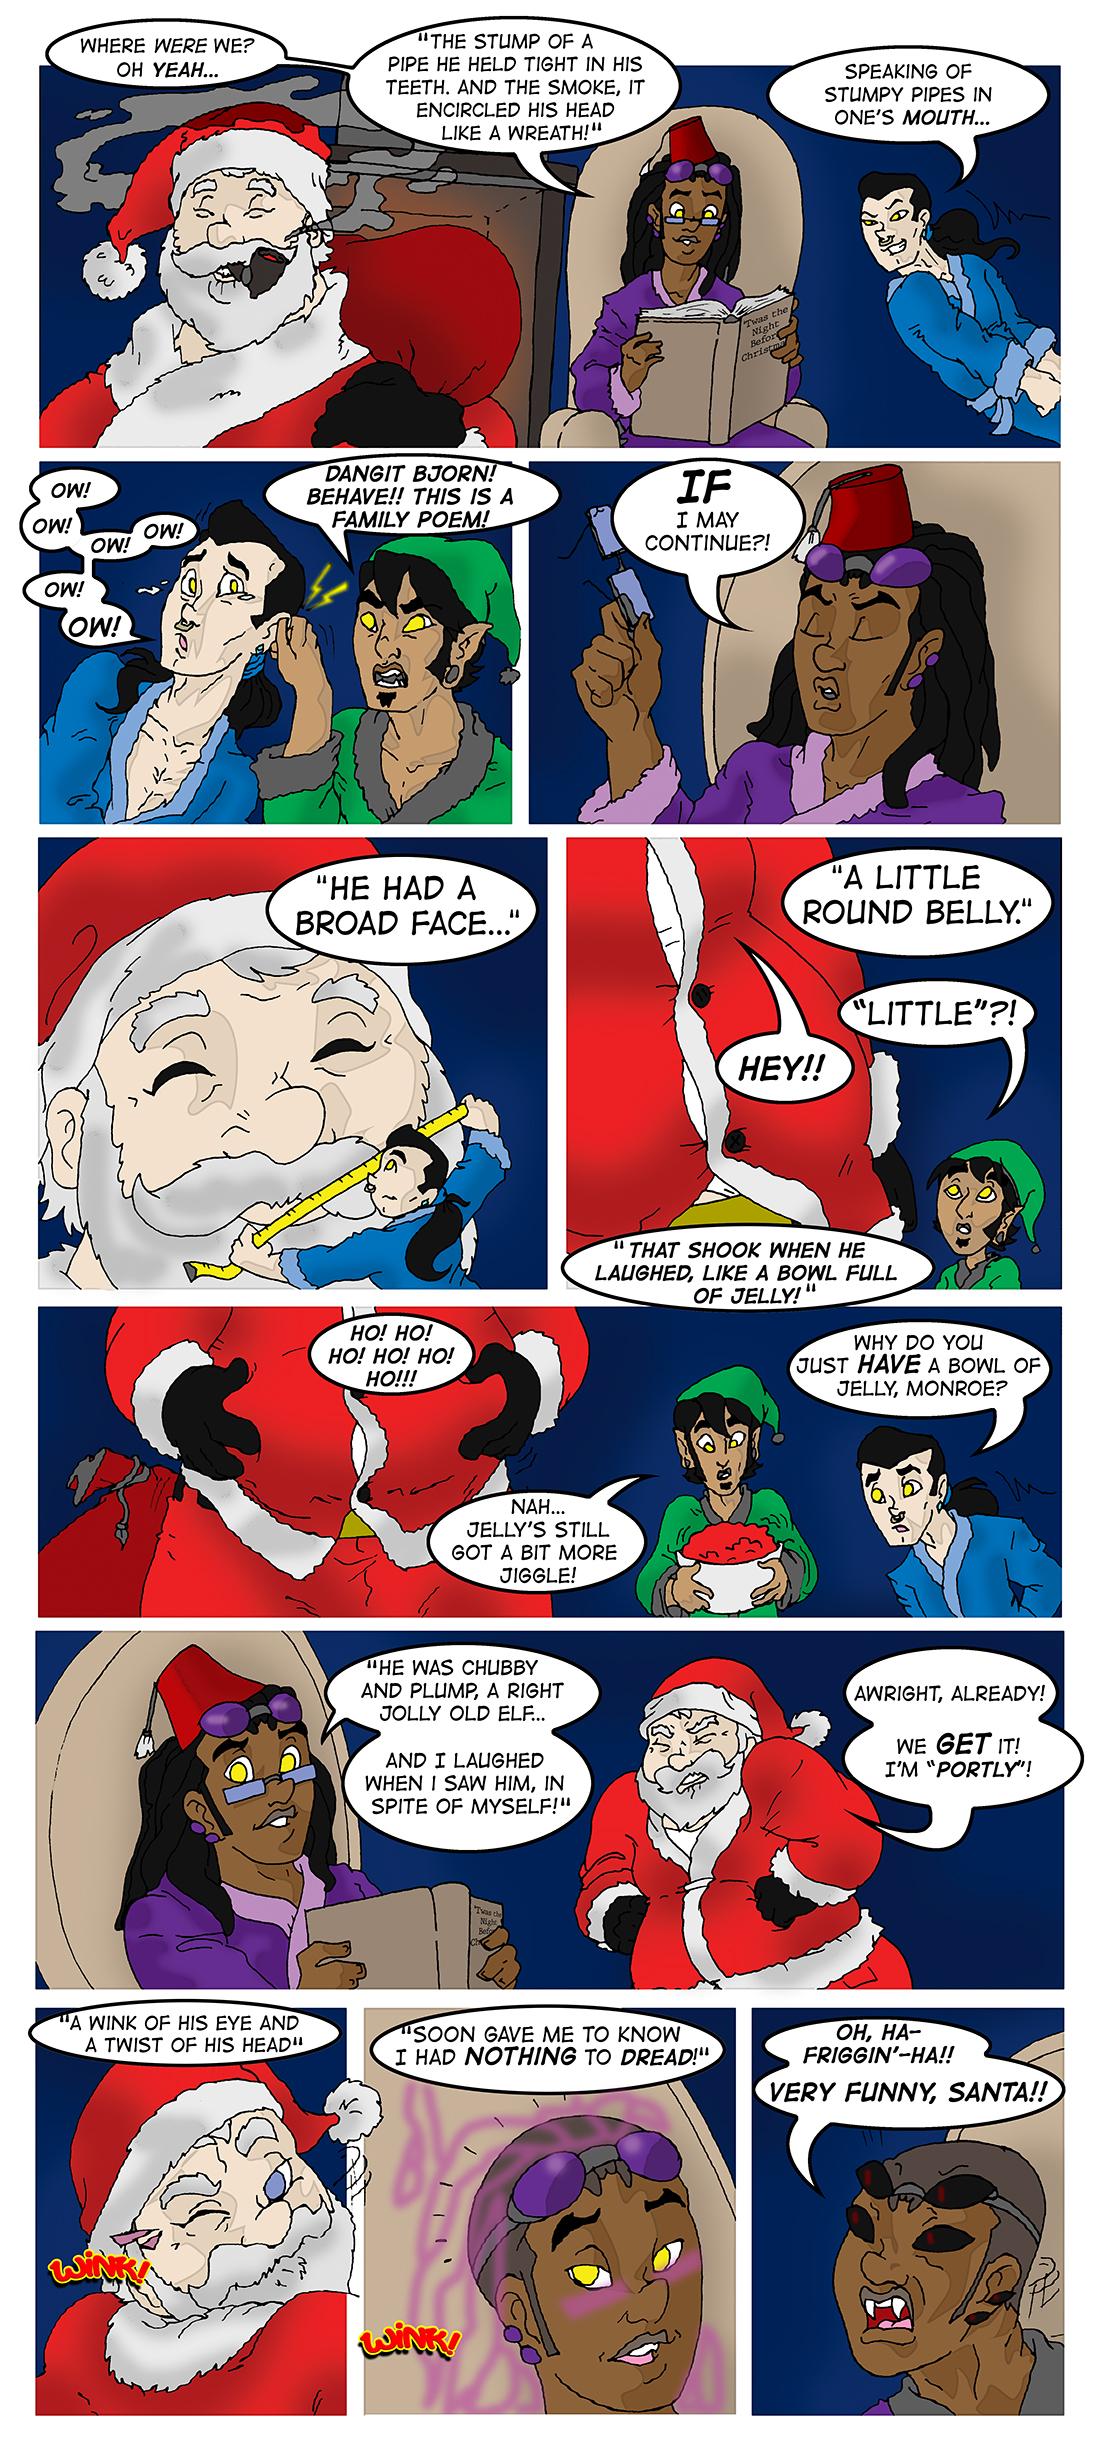 'Twas the Night Before Christmas - 7